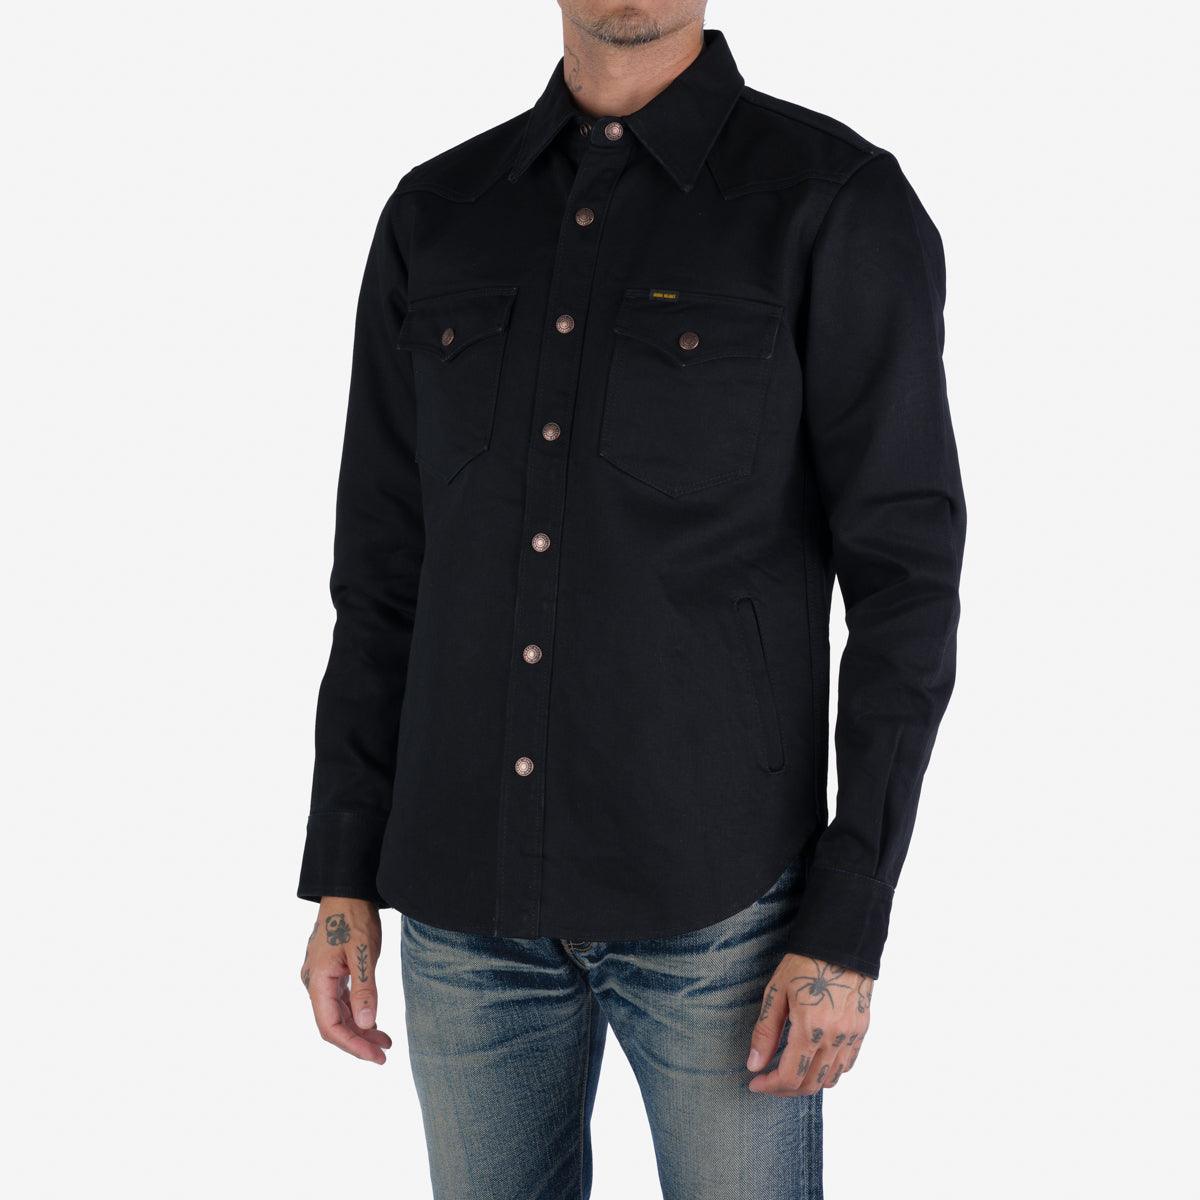 Image showing the IHSH-362-SBG - 16oz Non-Selvedge Denim CPO Shirt - Superblack (Fades to Grey) which is a Shirts described by the following info Iron Heart, Released, Shirts, Tops and sold on the IRON HEART GERMANY online store